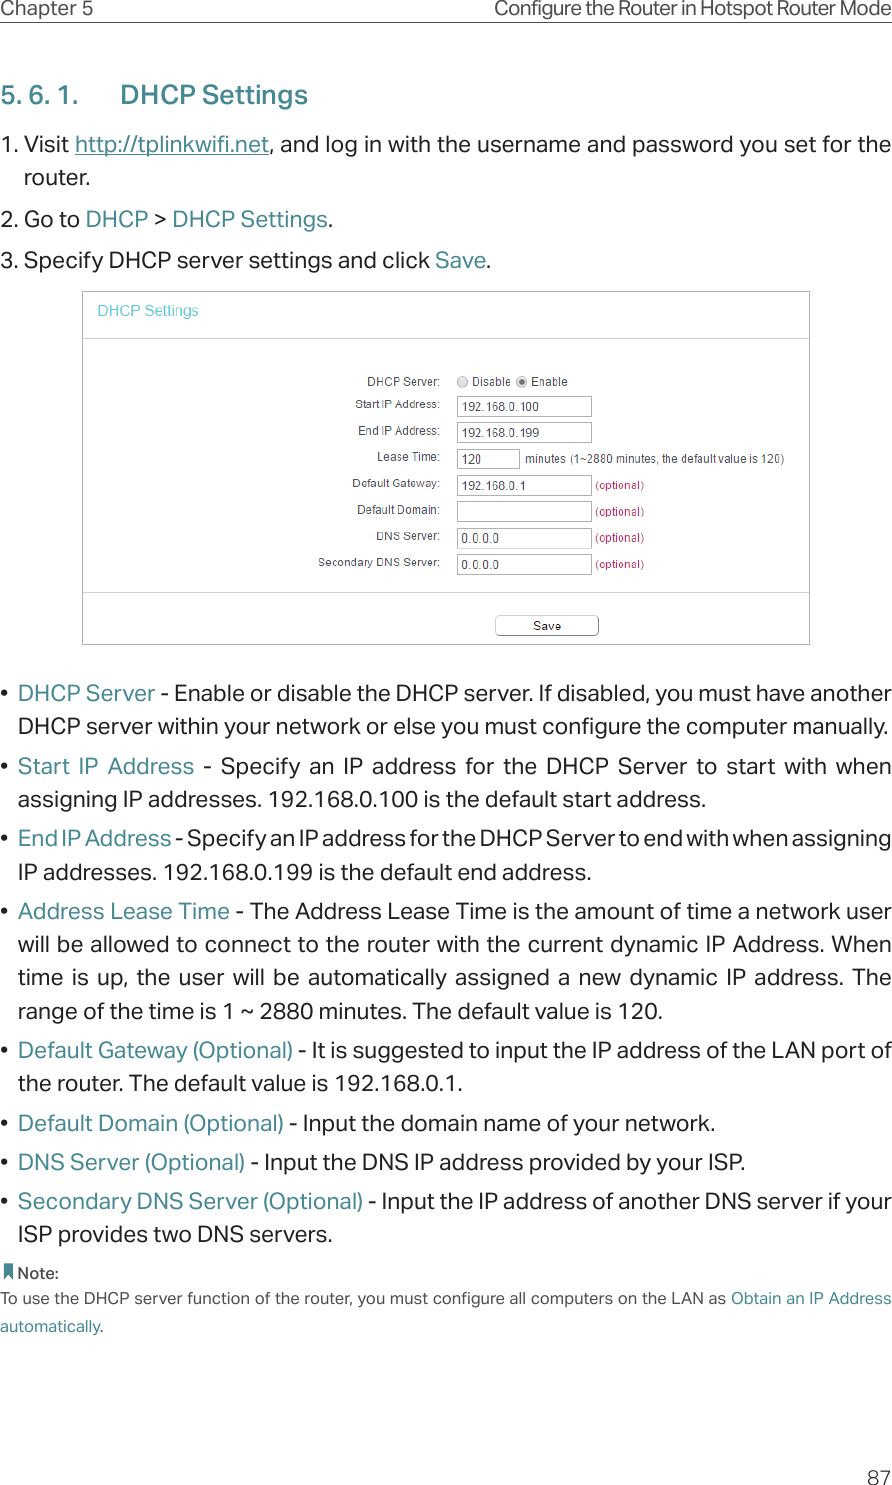 87Chapter 5 Configure the Router in Hotspot Router Mode5. 6. 1.  DHCP Settings1. Visit http://tplinkwifi.net, and log in with the username and password you set for the router.2. Go to DHCP &gt; DHCP Settings. 3. Specify DHCP server settings and click Save.•  DHCP Server - Enable or disable the DHCP server. If disabled, you must have another DHCP server within your network or else you must configure the computer manually.•  Start IP Address - Specify an IP address for the DHCP Server to start with when assigning IP addresses. 192.168.0.100 is the default start address.•  End IP Address - Specify an IP address for the DHCP Server to end with when assigning IP addresses. 192.168.0.199 is the default end address.•  Address Lease Time - The Address Lease Time is the amount of time a network user will be allowed to connect to the router with the current dynamic IP Address. When time is up, the user will be automatically assigned a new dynamic IP address. The range of the time is 1 ~ 2880 minutes. The default value is 120.•  Default Gateway (Optional) - It is suggested to input the IP address of the LAN port of the router. The default value is 192.168.0.1.•  Default Domain (Optional) - Input the domain name of your network.•  DNS Server (Optional) - Input the DNS IP address provided by your ISP.•  Secondary DNS Server (Optional) - Input the IP address of another DNS server if your ISP provides two DNS servers. Note:To use the DHCP server function of the router, you must configure all computers on the LAN as Obtain an IP Address automatically.